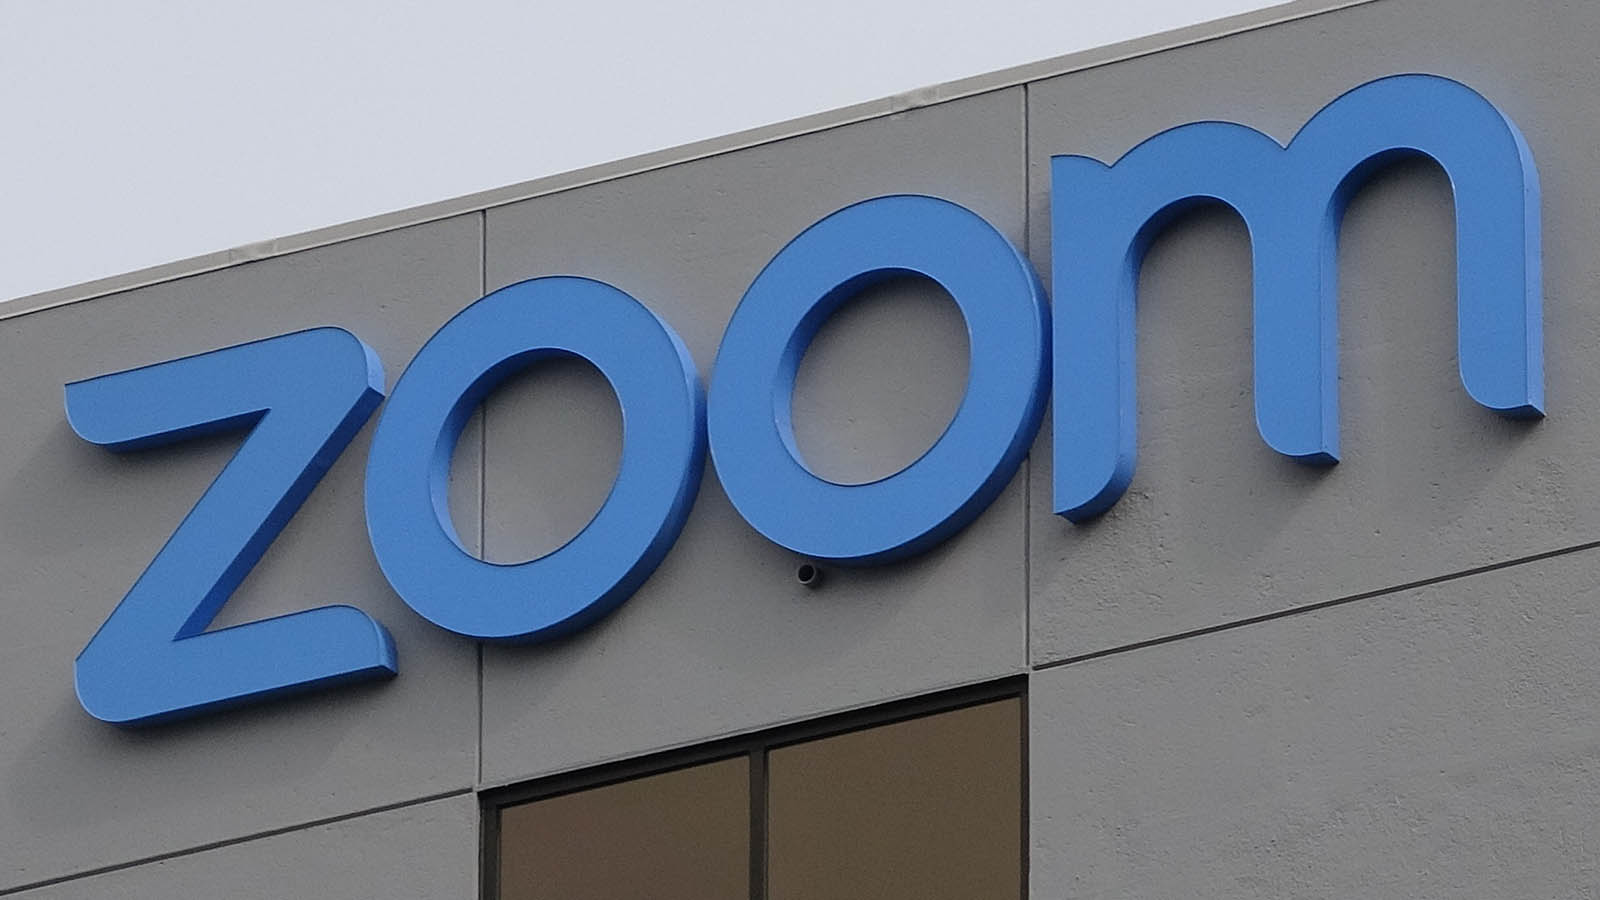 Zoom to pay $85M to settle privacy, ‘Zoombombing’ lawsuit